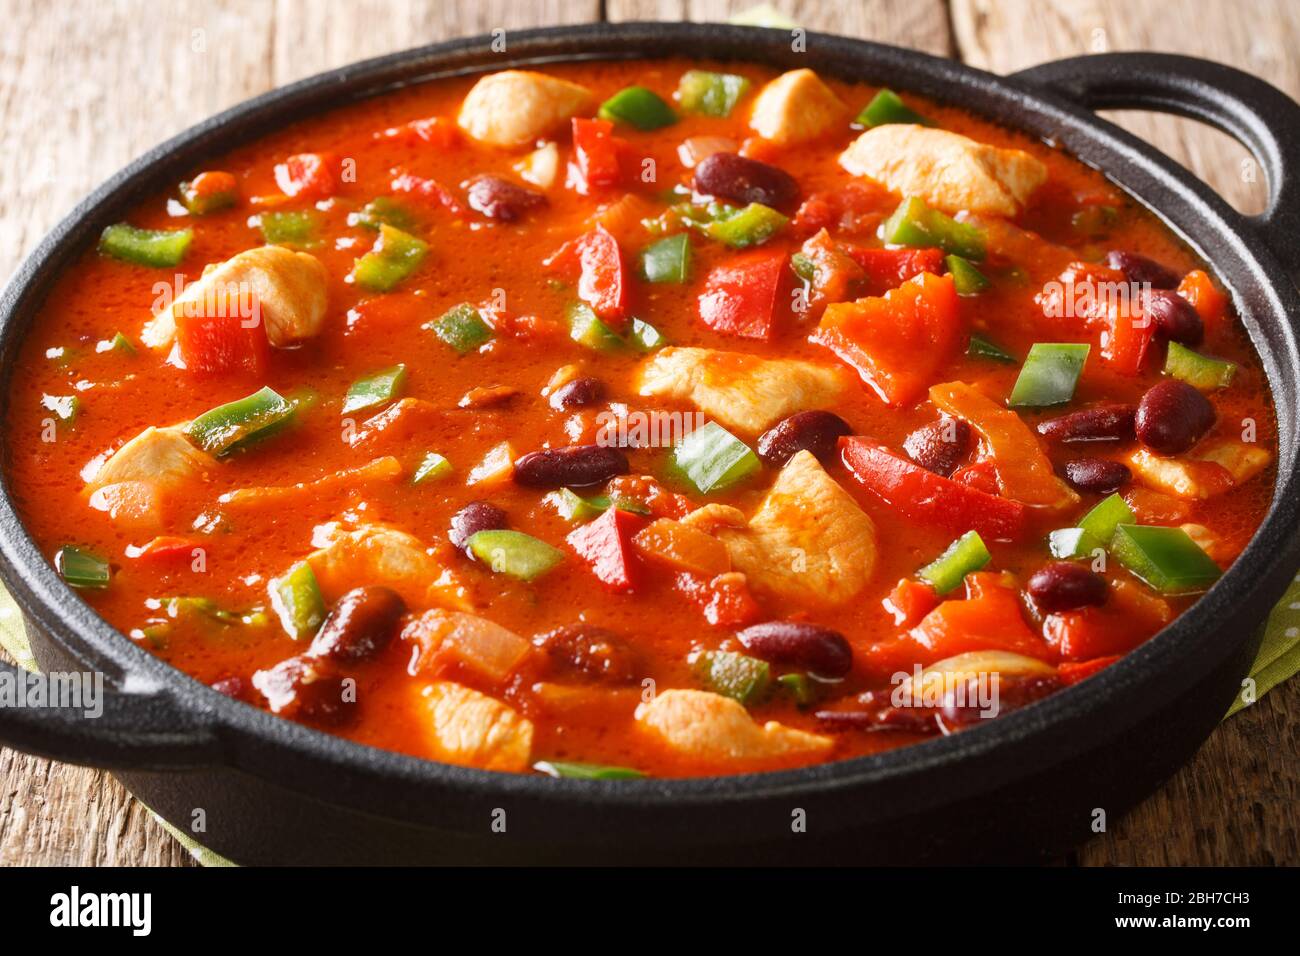 Mexican Chicken With Red Beans In Spicy Chili Sauce Close Up In A Pan On The Table Horizontal Stock Photo Alamy